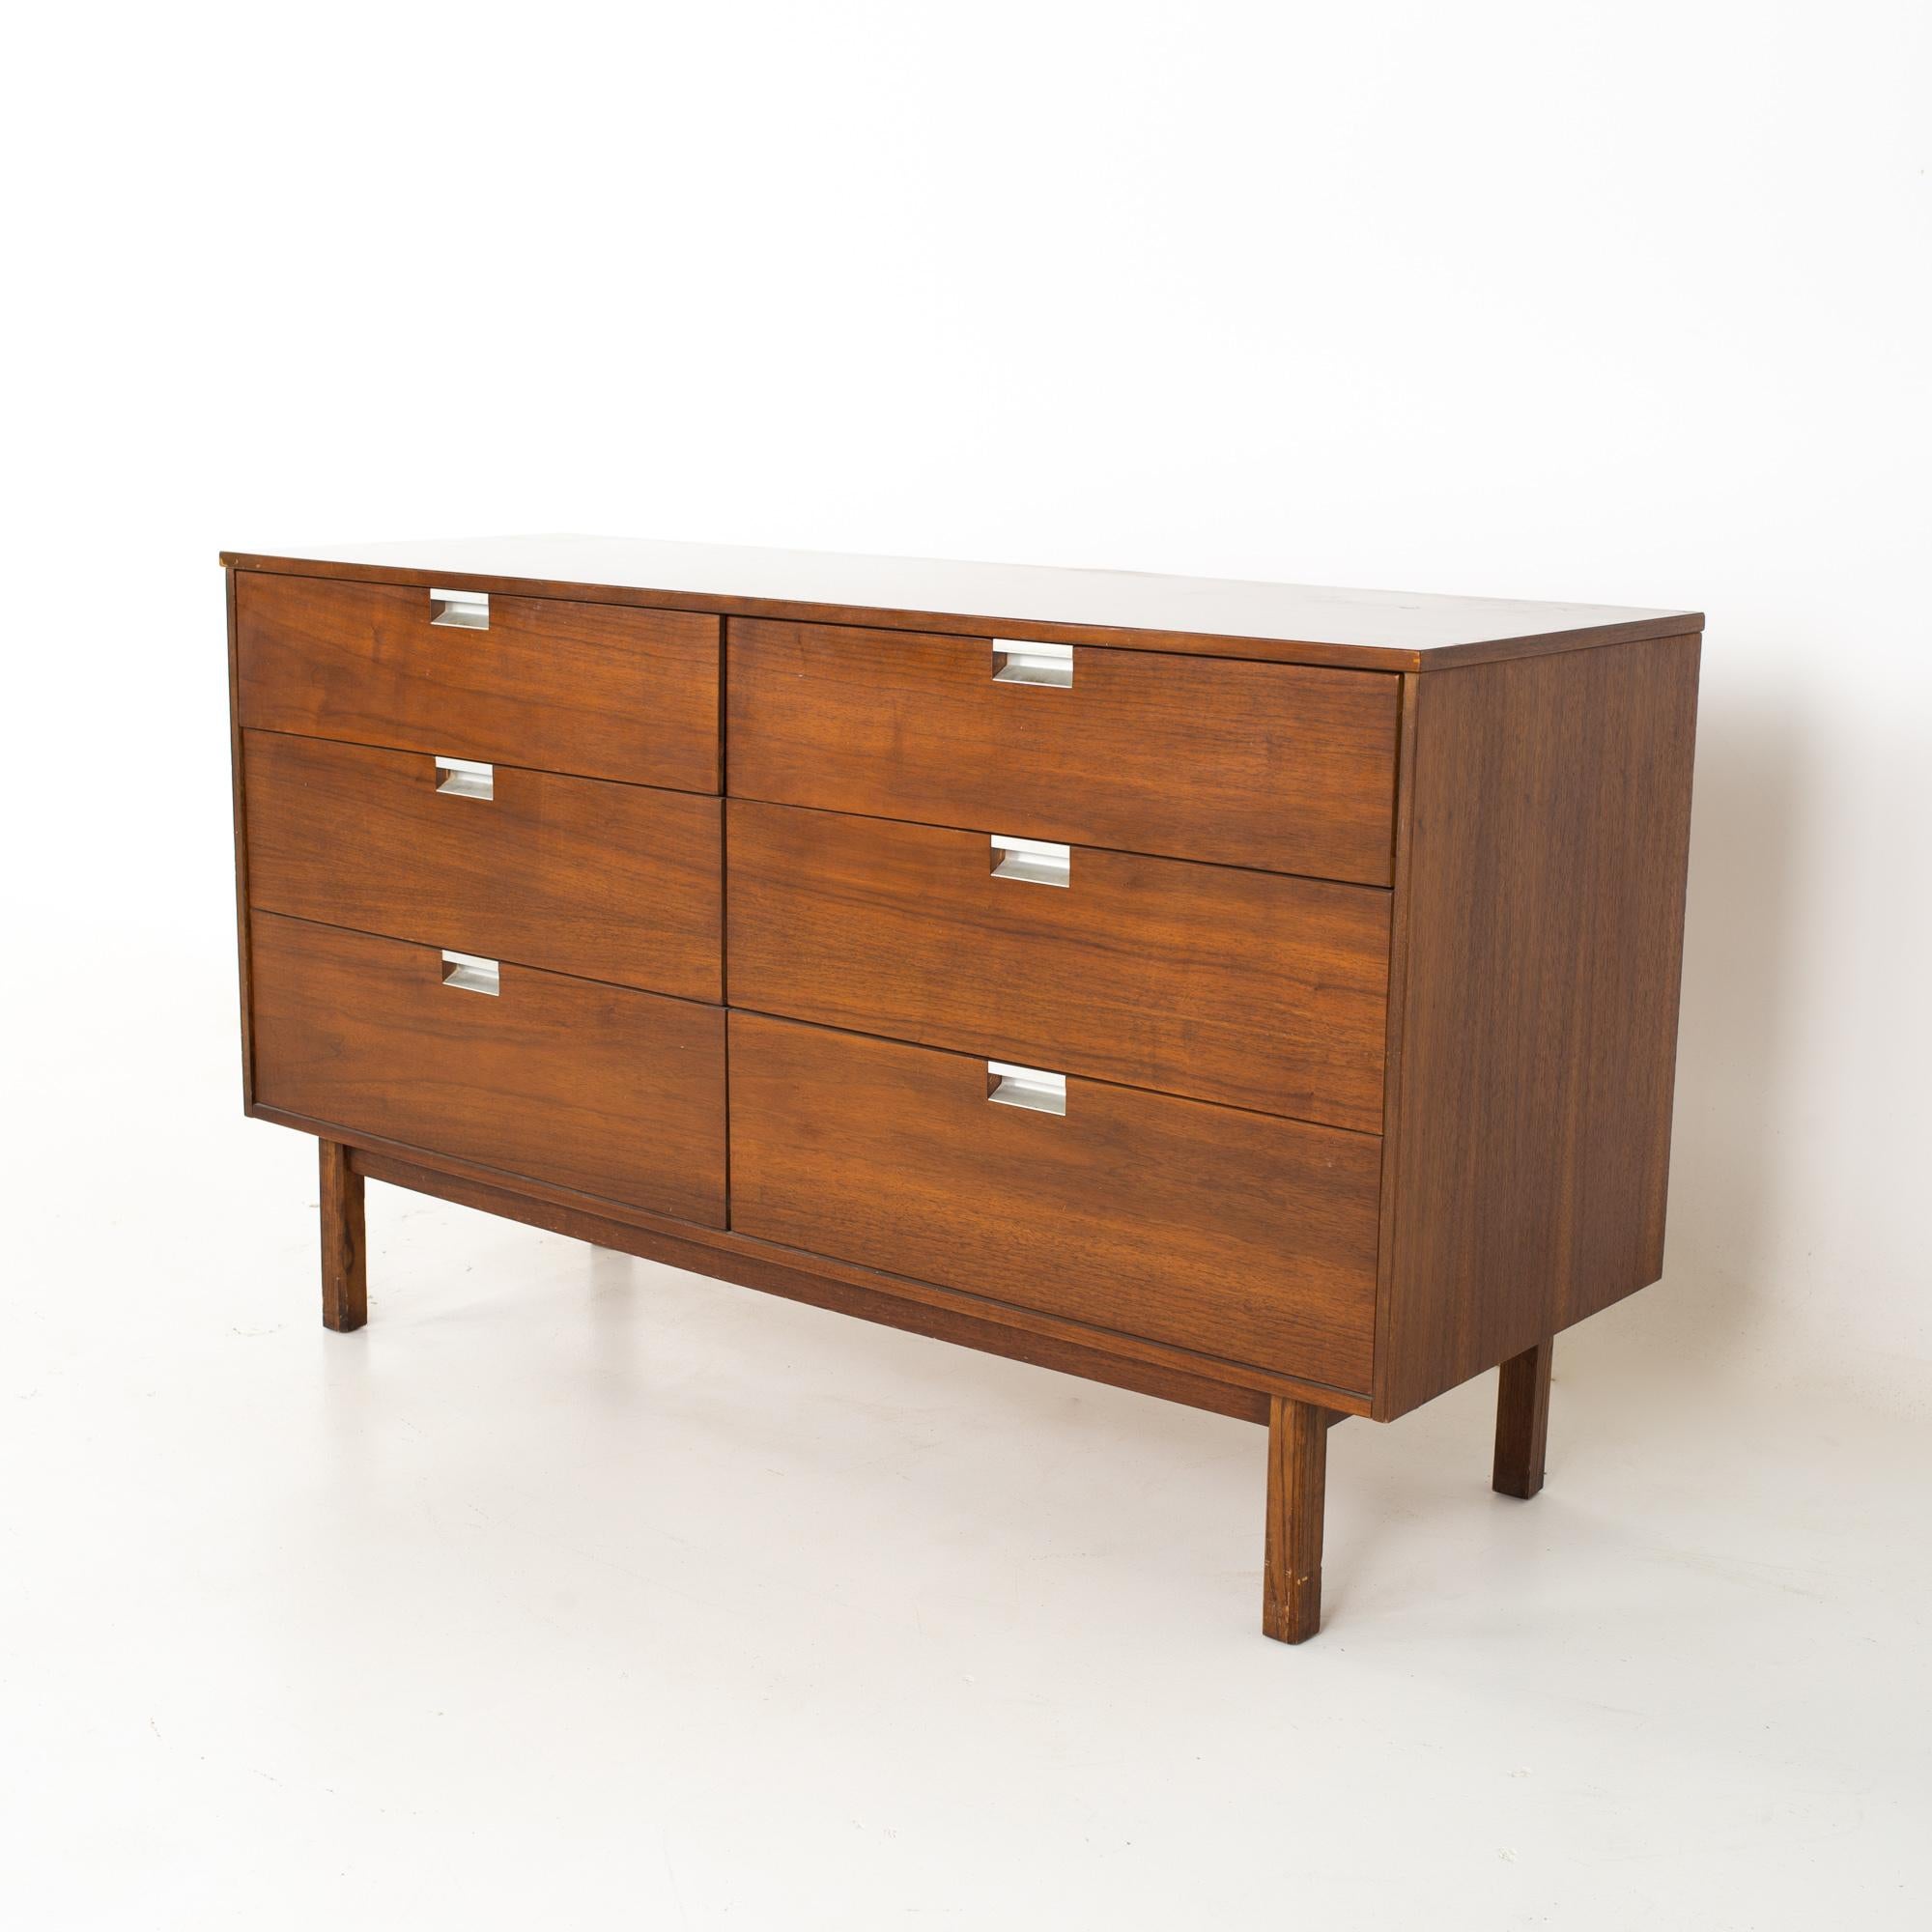 George Nelson style Bassett Furniture mid century walnut Formica and stainless steel 6 drawer lowboy dresser
Dresser measures: 52 wide x 17.75 deep x 30.25 inches high

All pieces of furniture can be had in what we call restored vintage